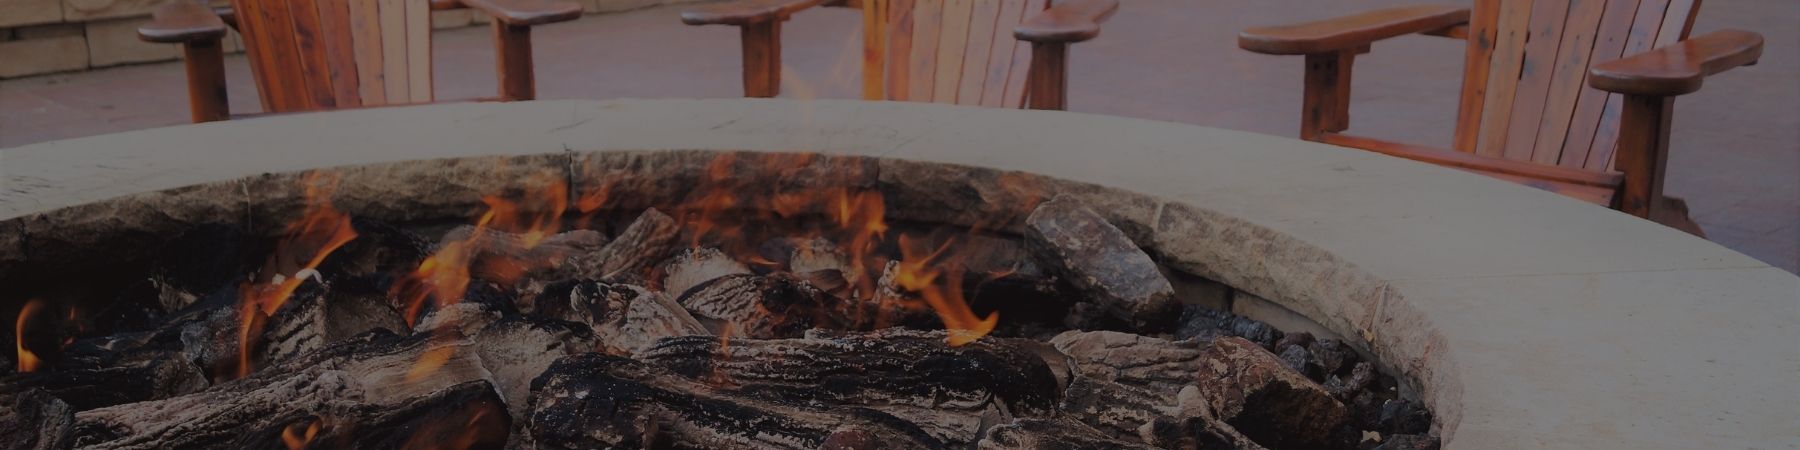 Open Air Burning Halton Hills, Are Propane Fire Pits Legal In Toronto